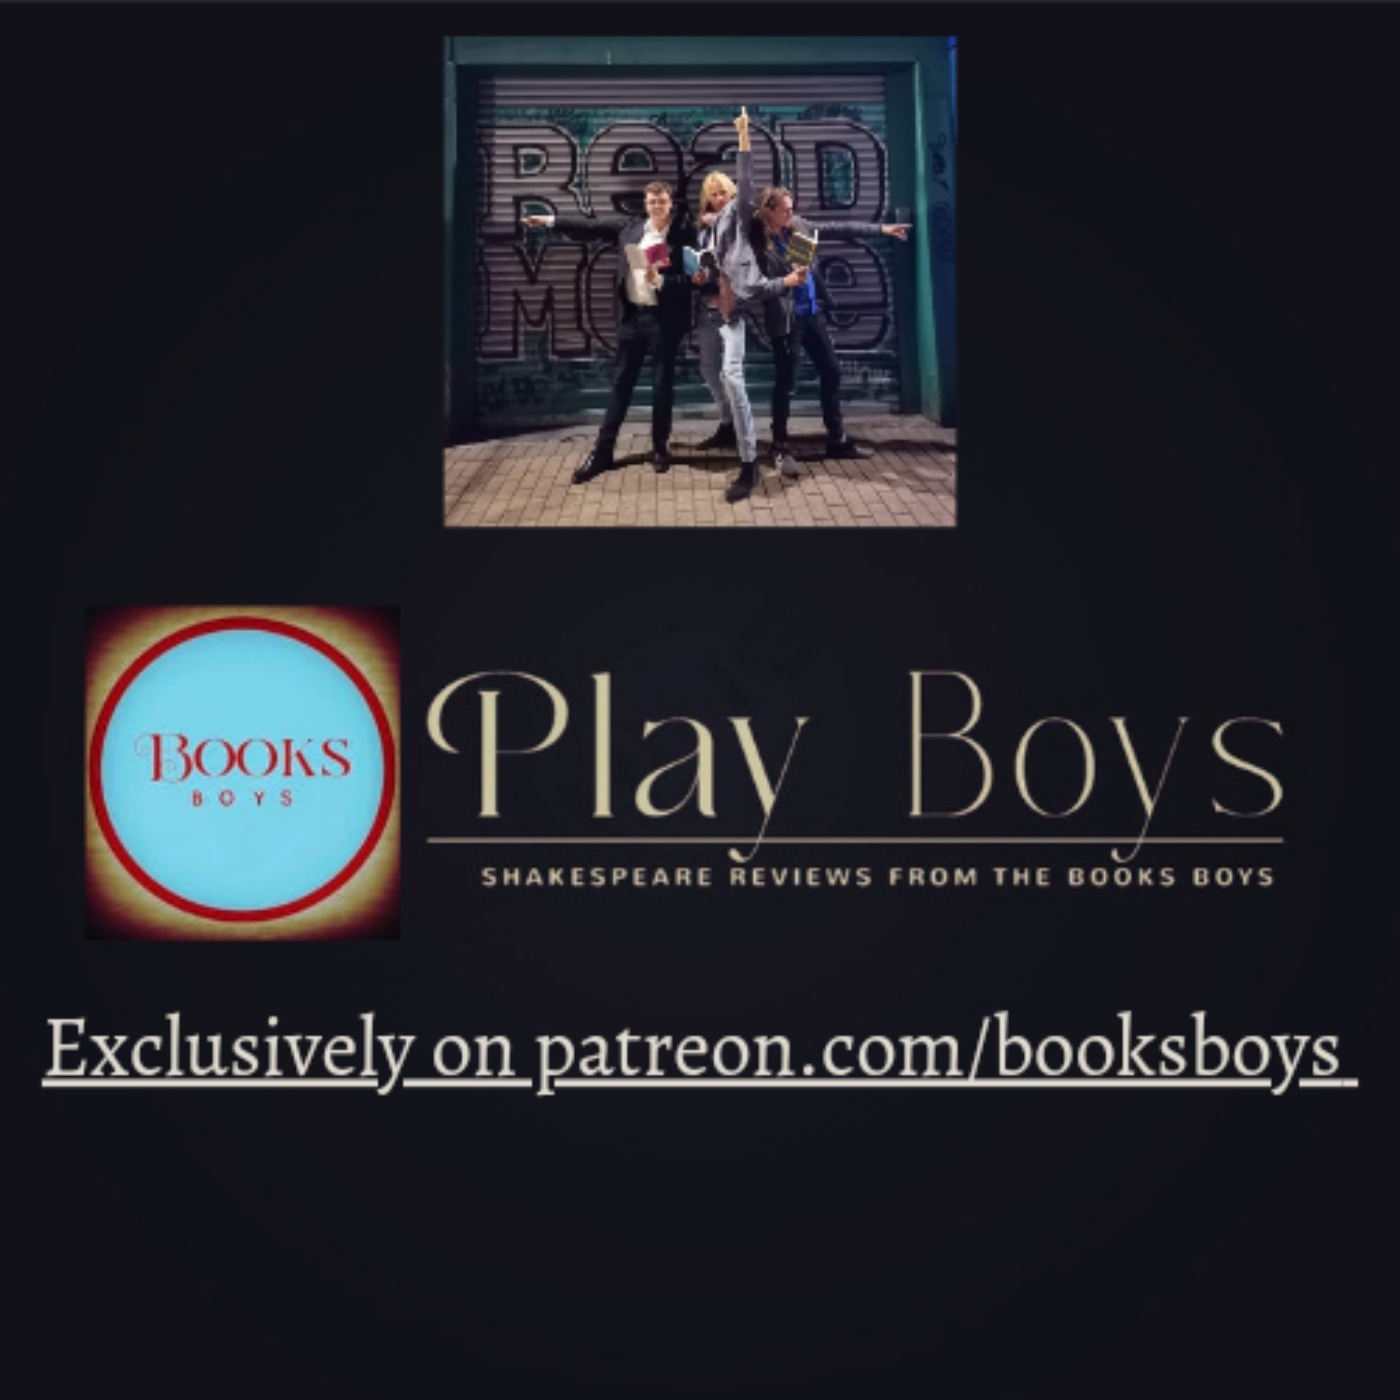 Playboys Episode 7: Measure For Measure